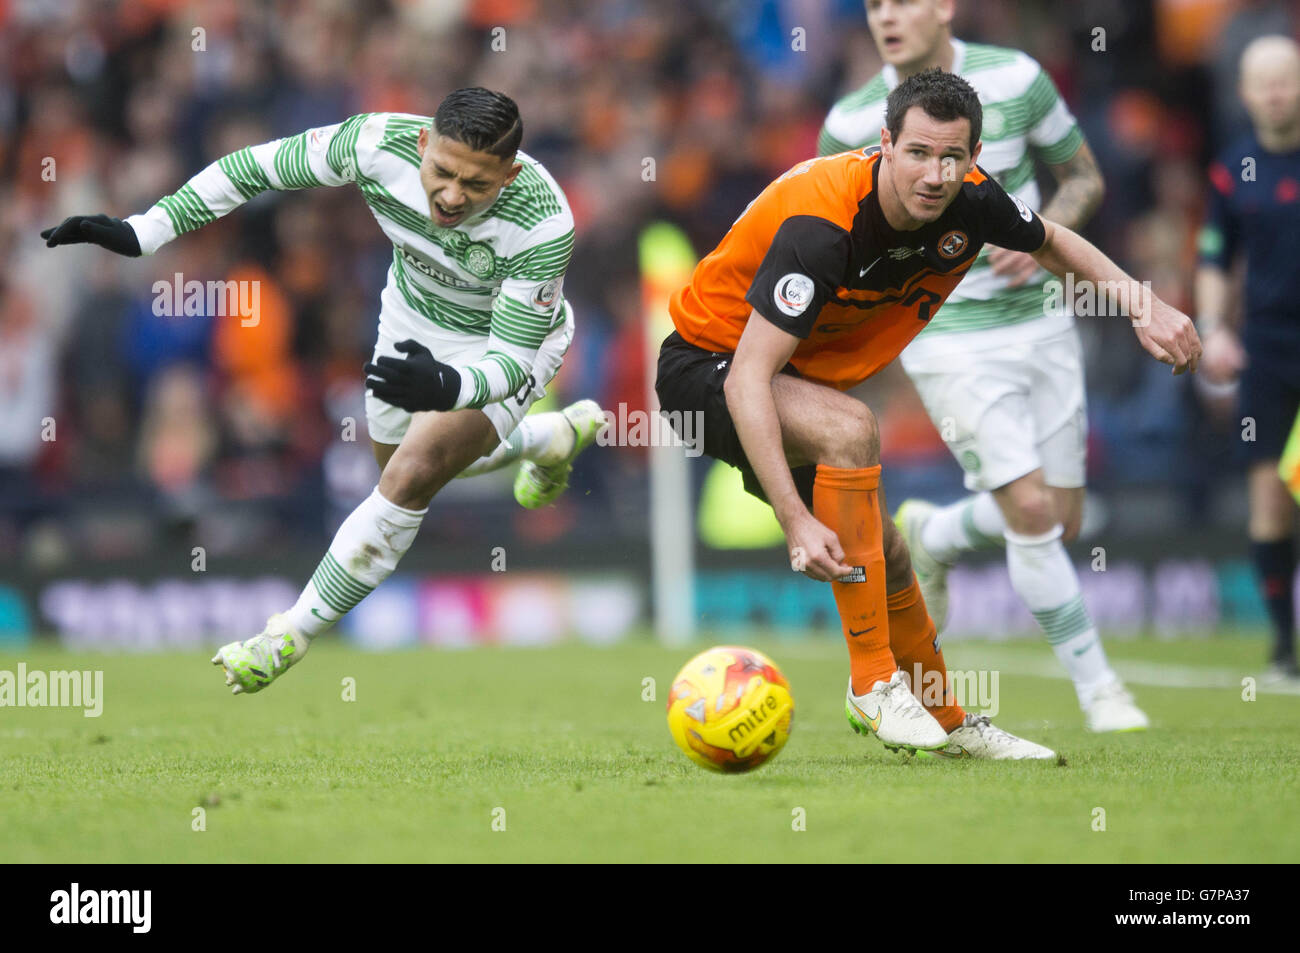 Celtic's Emilio Izaguirre (left) and Dundee United Ryan McGowan (right) tussle during the QTS Scottish League Cup Final at Hampden Park, Glasgow. Stock Photo